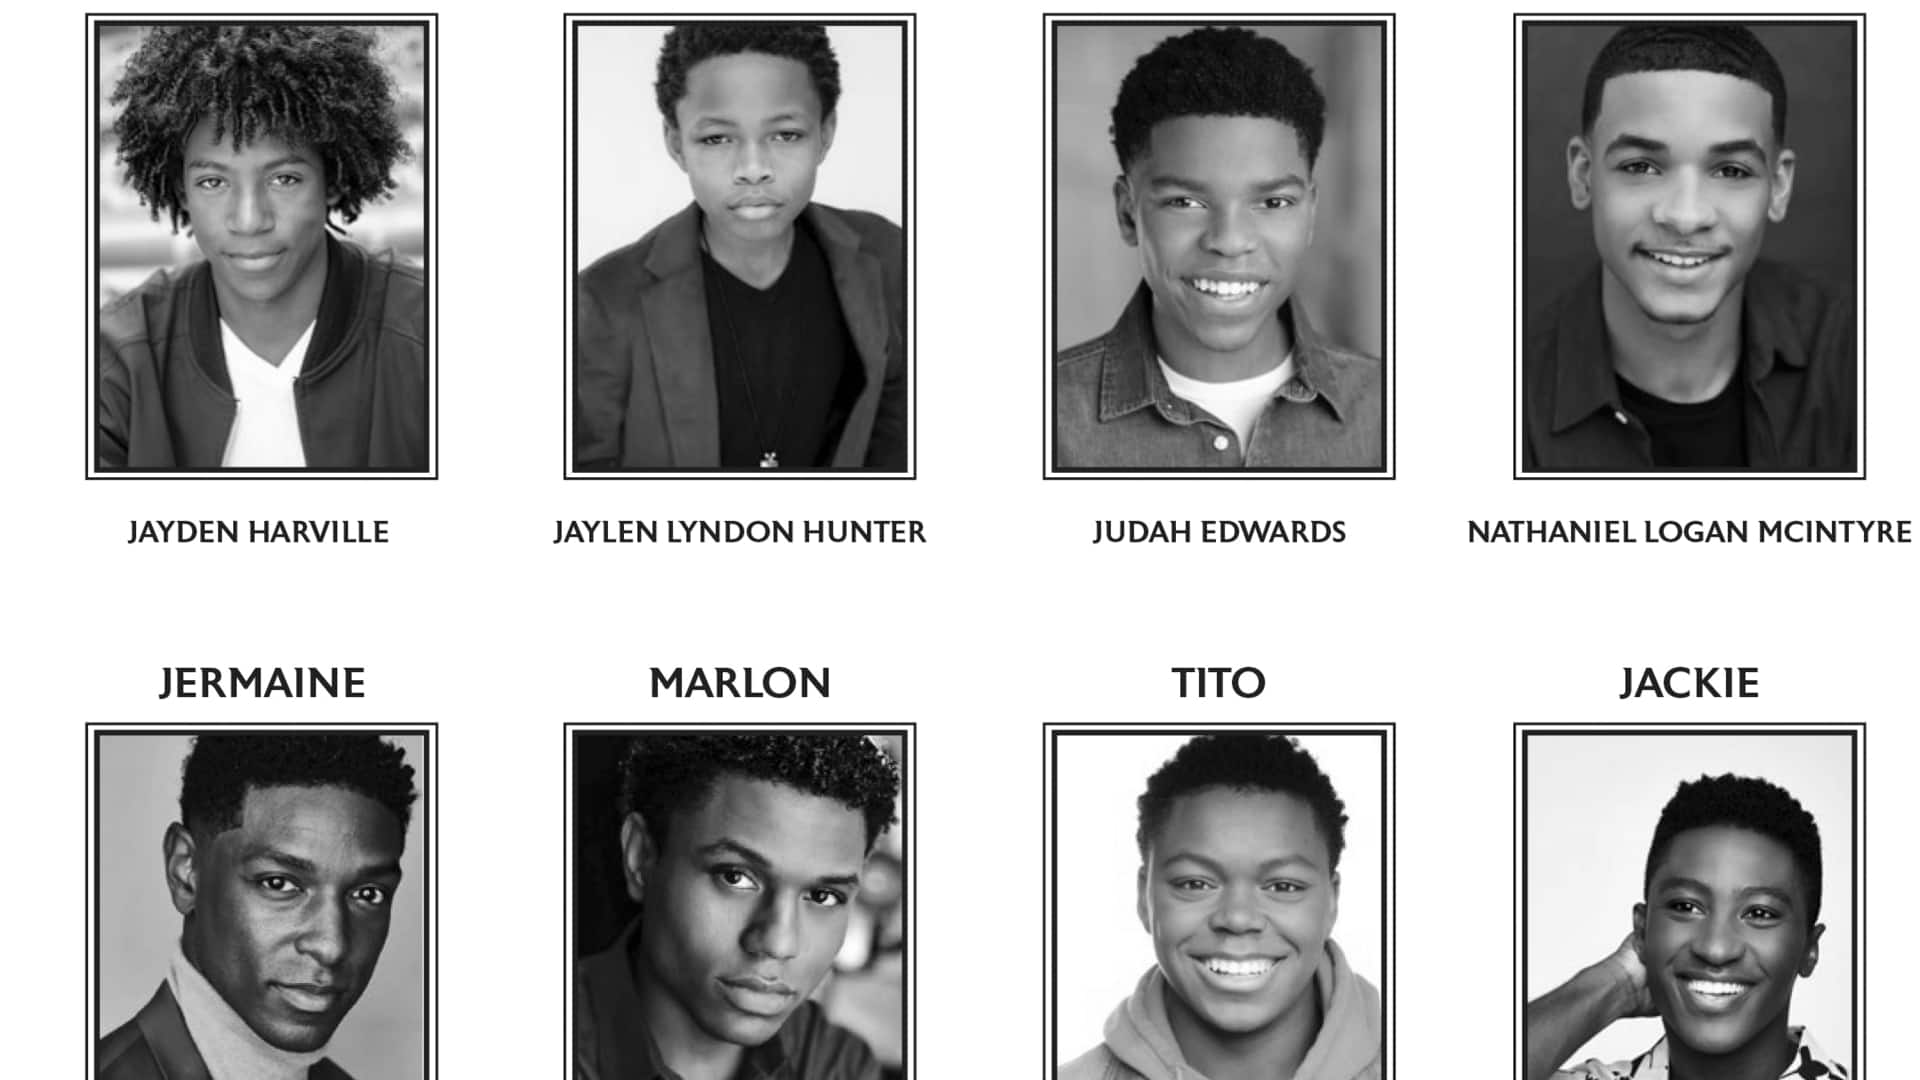 'Michael' makers finalize casting for Jackson 5